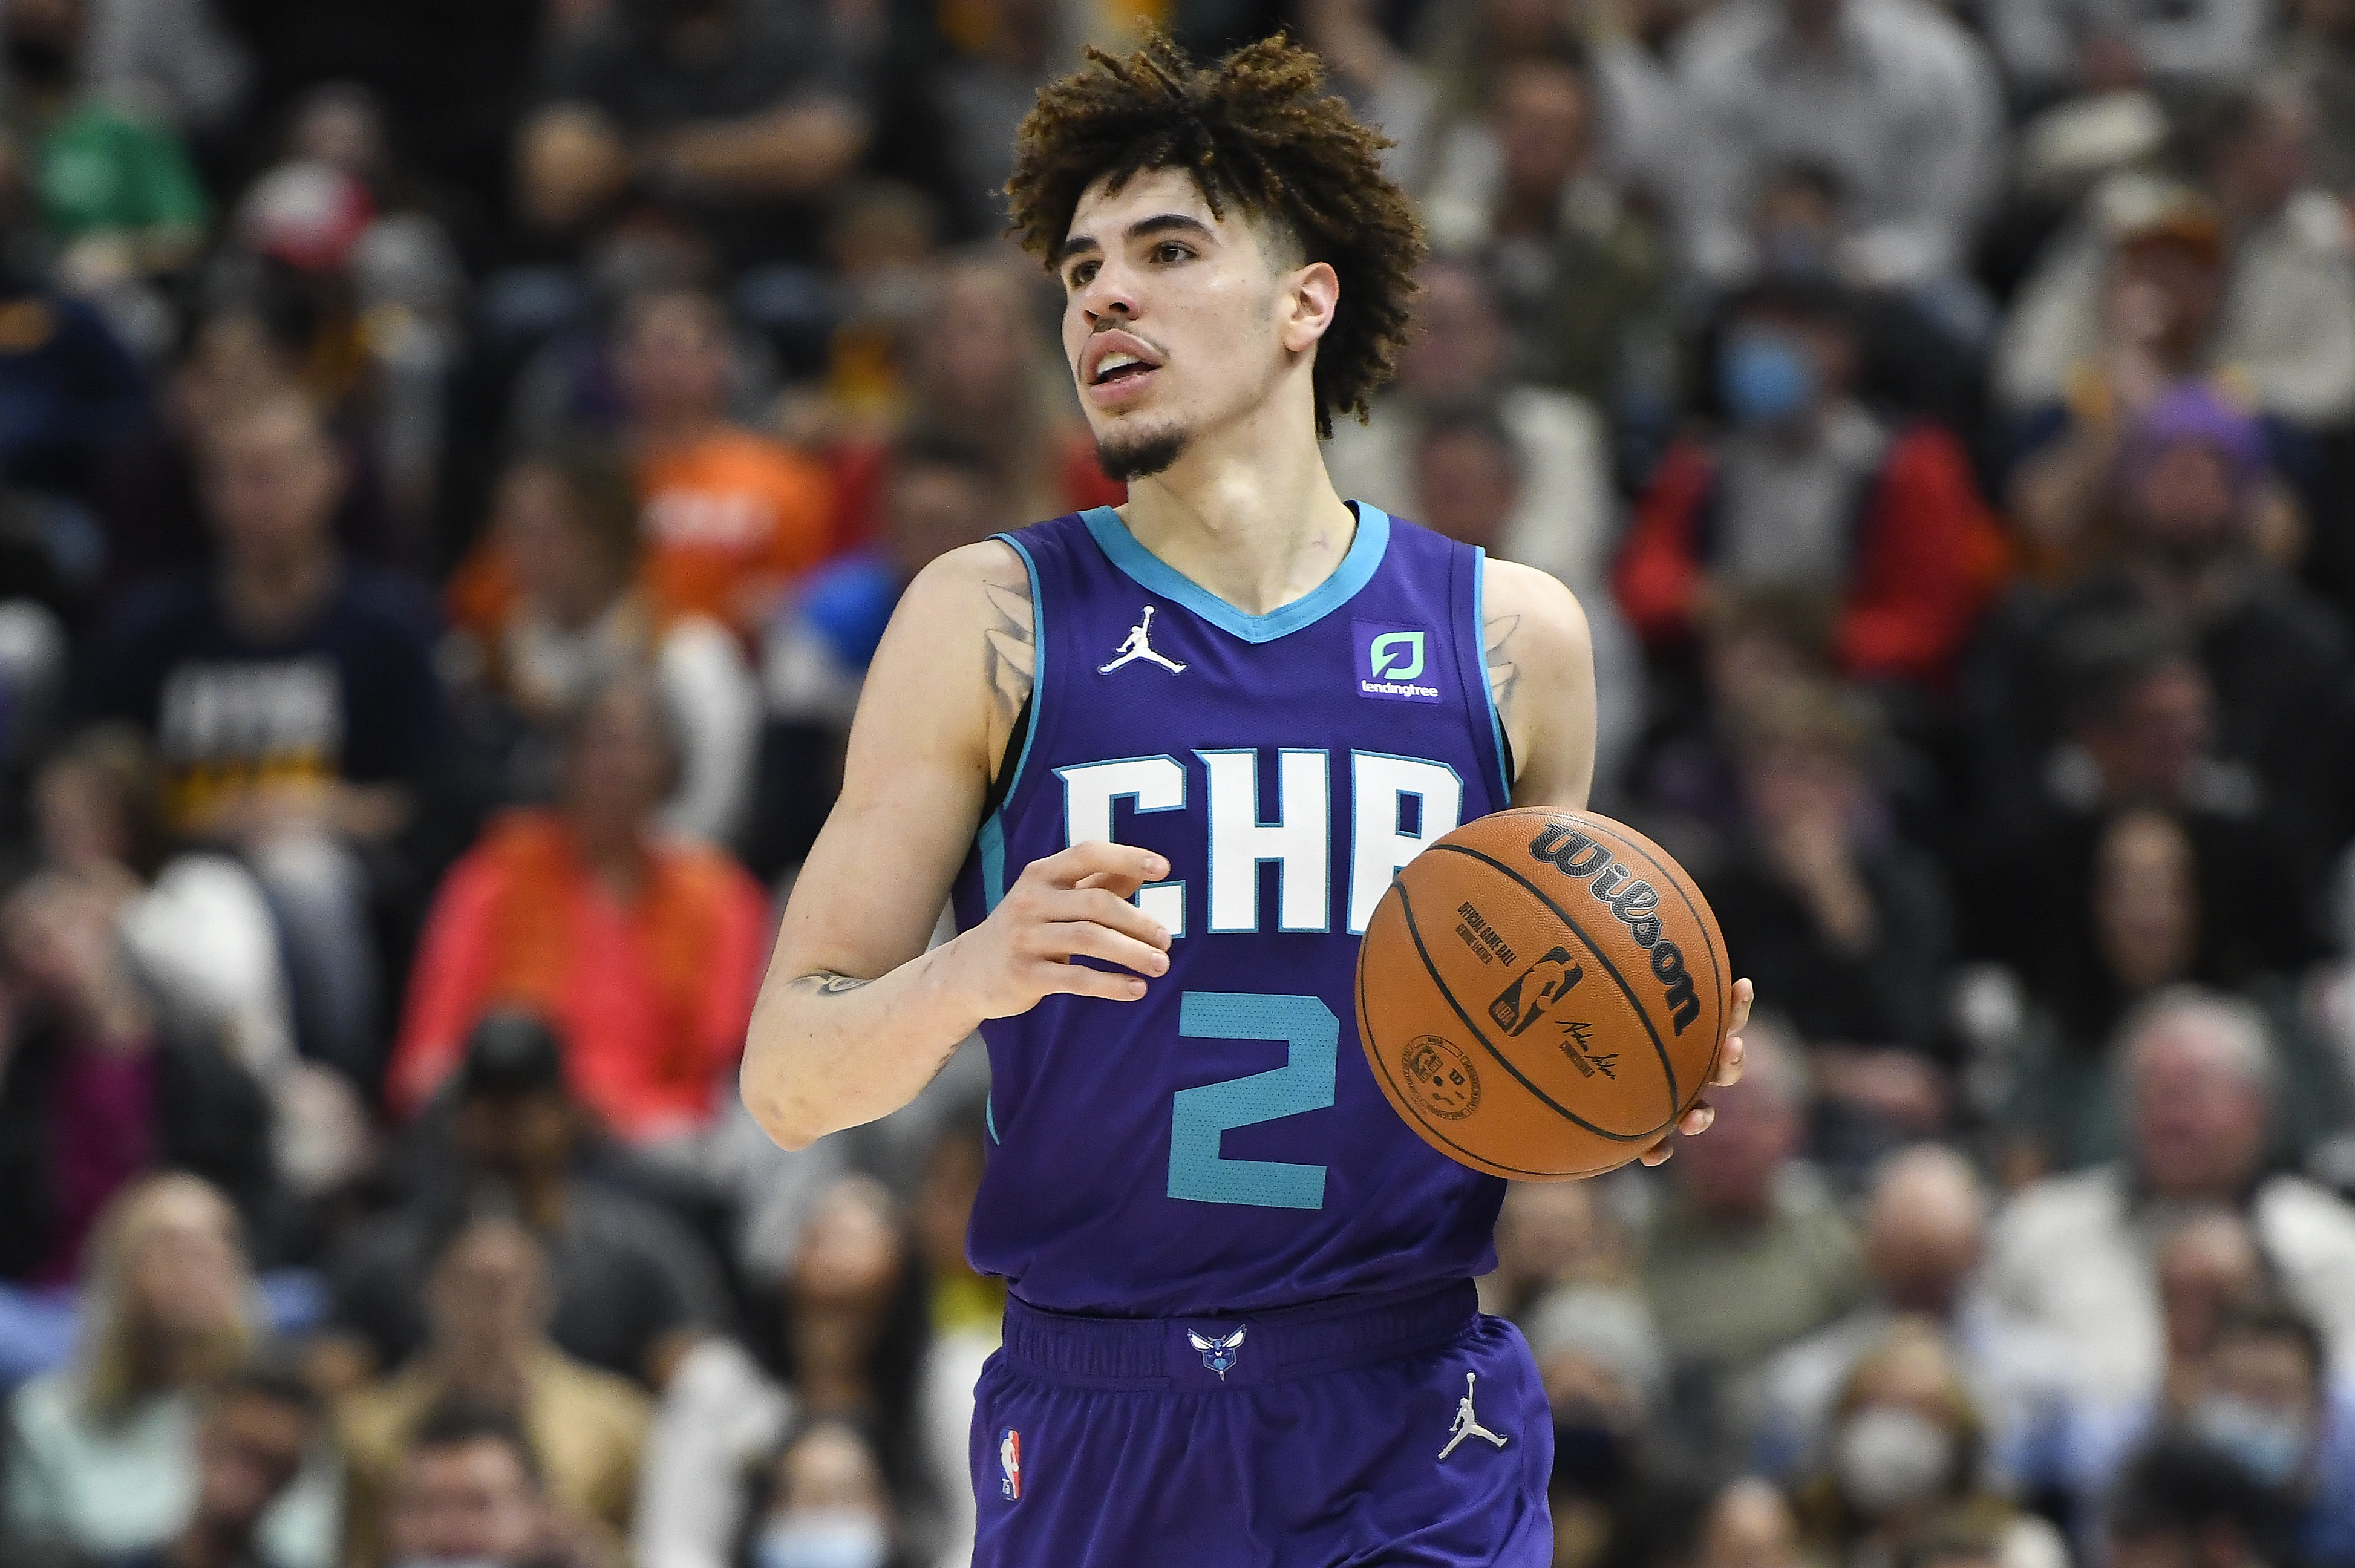 Charania] Charlotte Hornets All-Star LaMelo Ball is officially